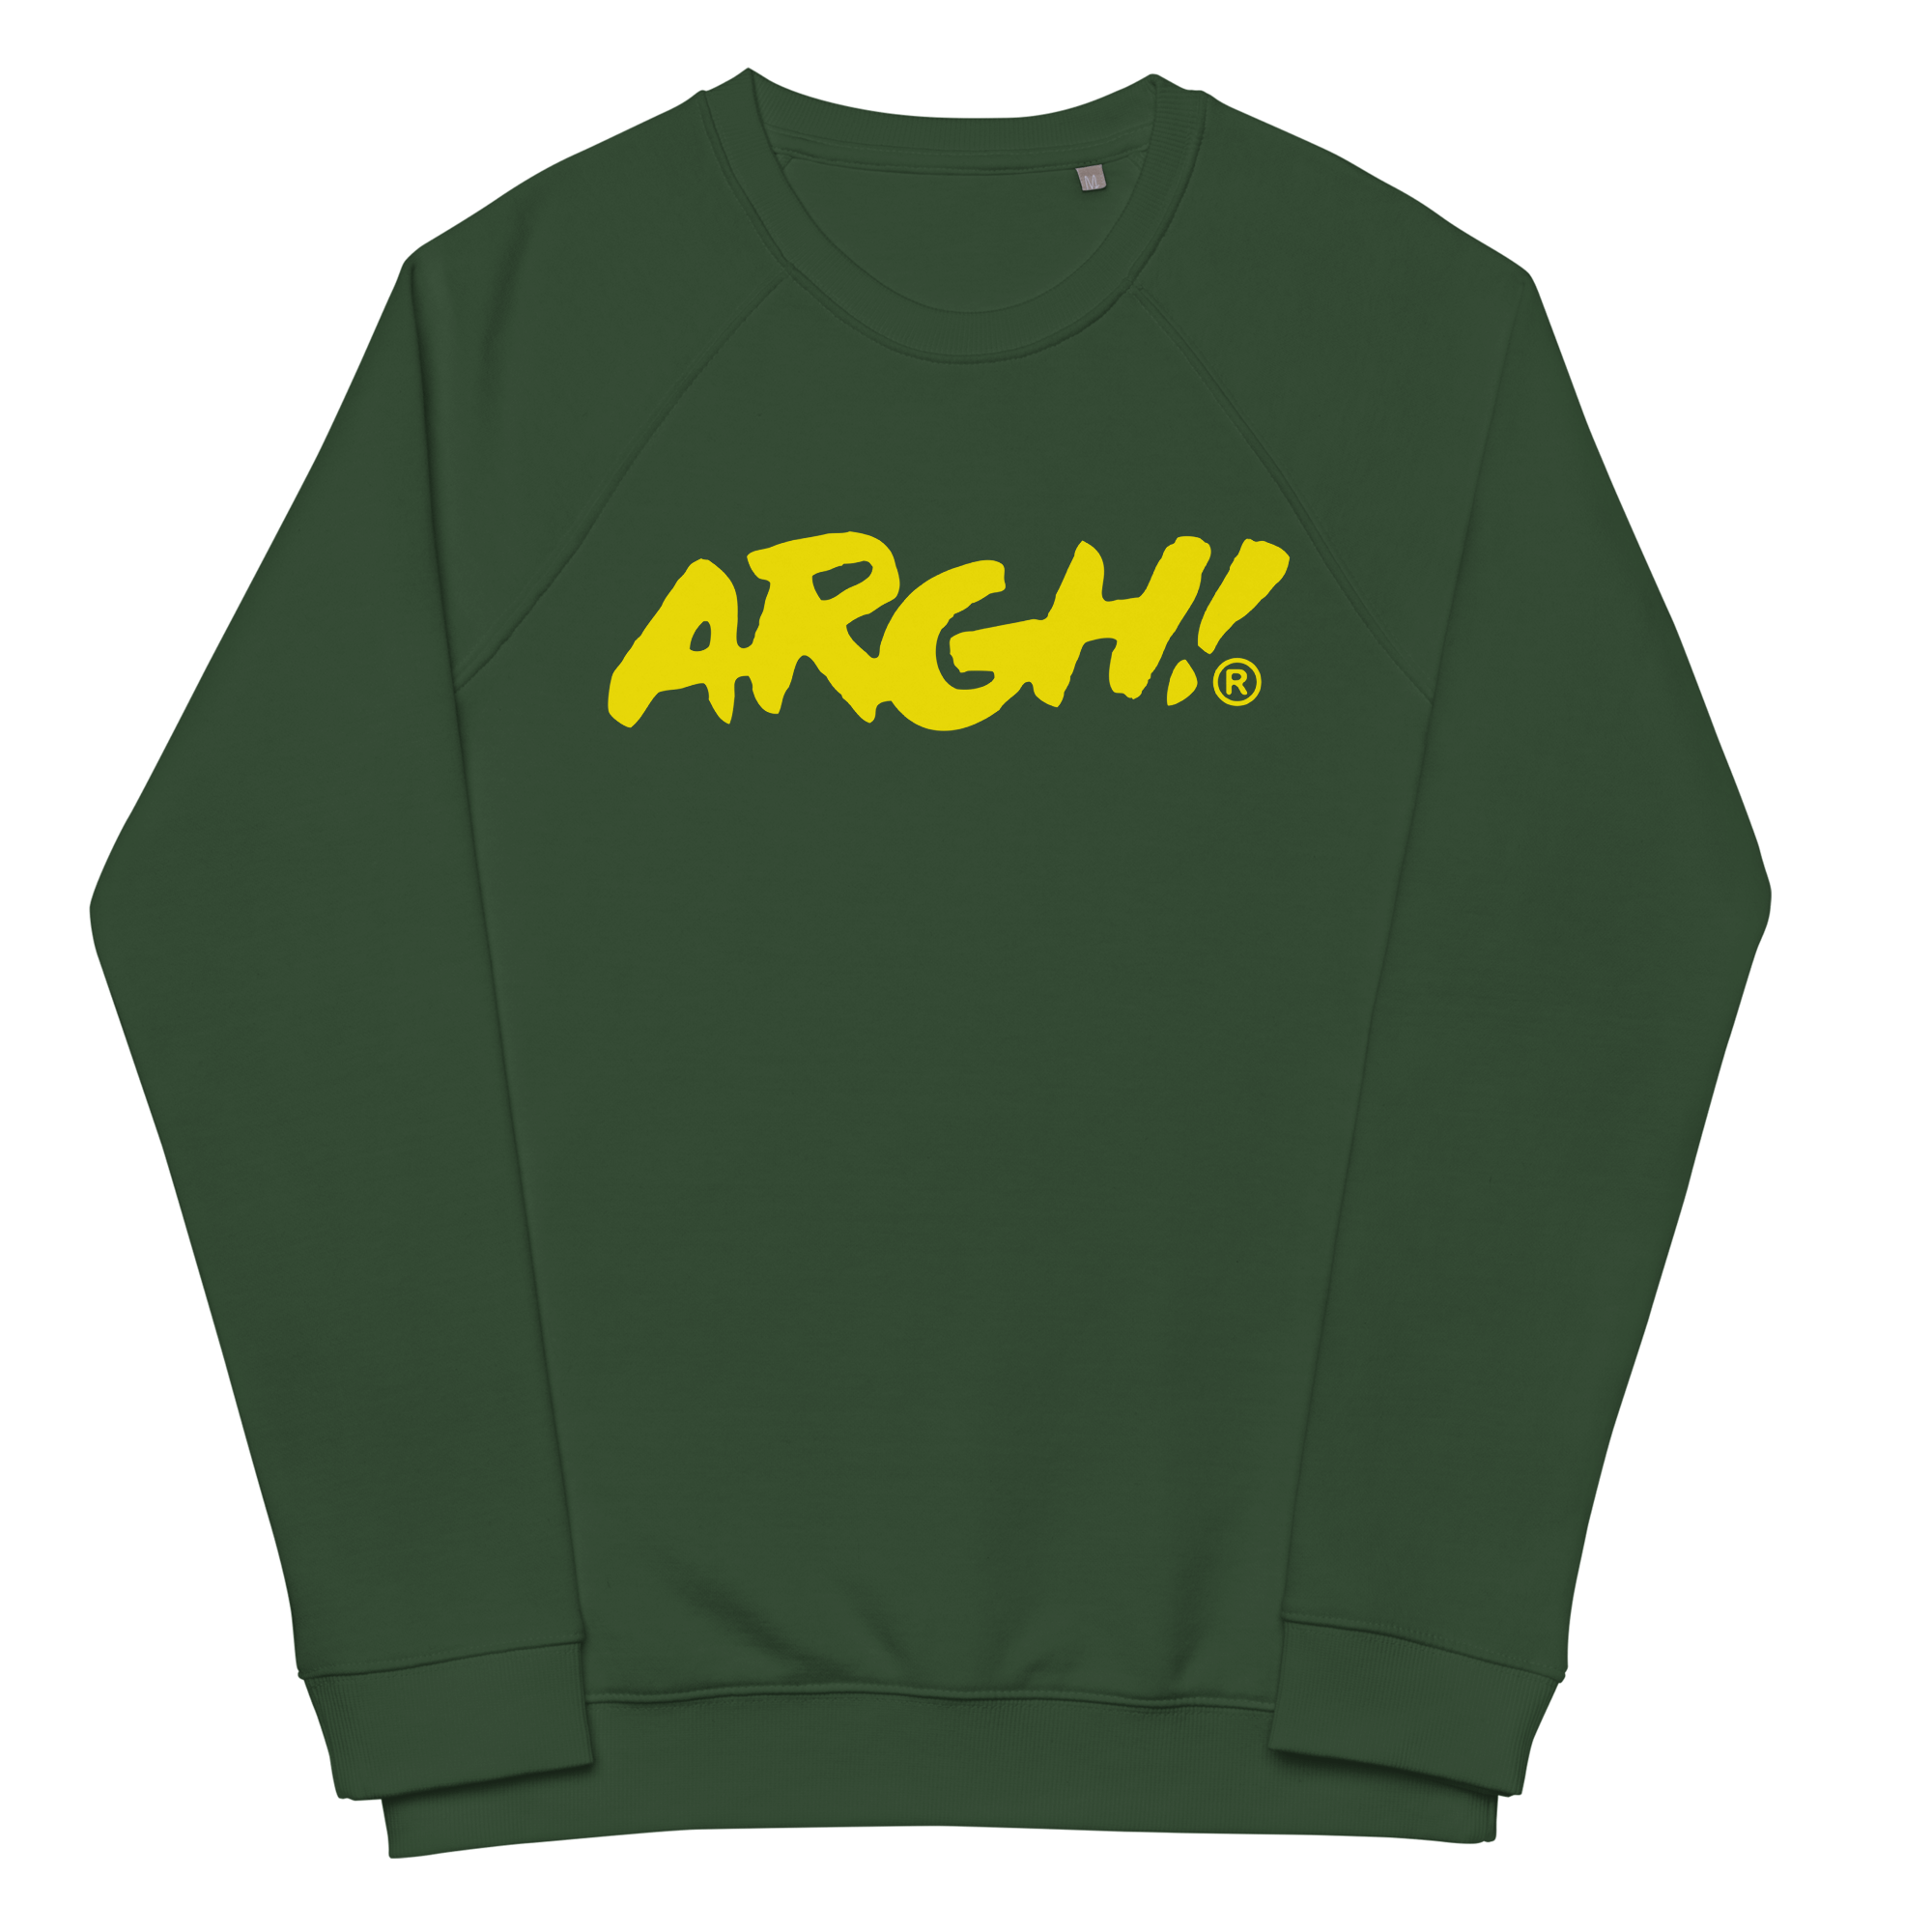 ARGH! Raglan SweatshirtARGH! Raglan Sweatshirt. feel comfy and look stylish at the same time. Mark both tasks as done with the unisex organic raglan sweatshirt. Its brushed fleece lining will make you feel like you’re being hugged by a cloud of softness .